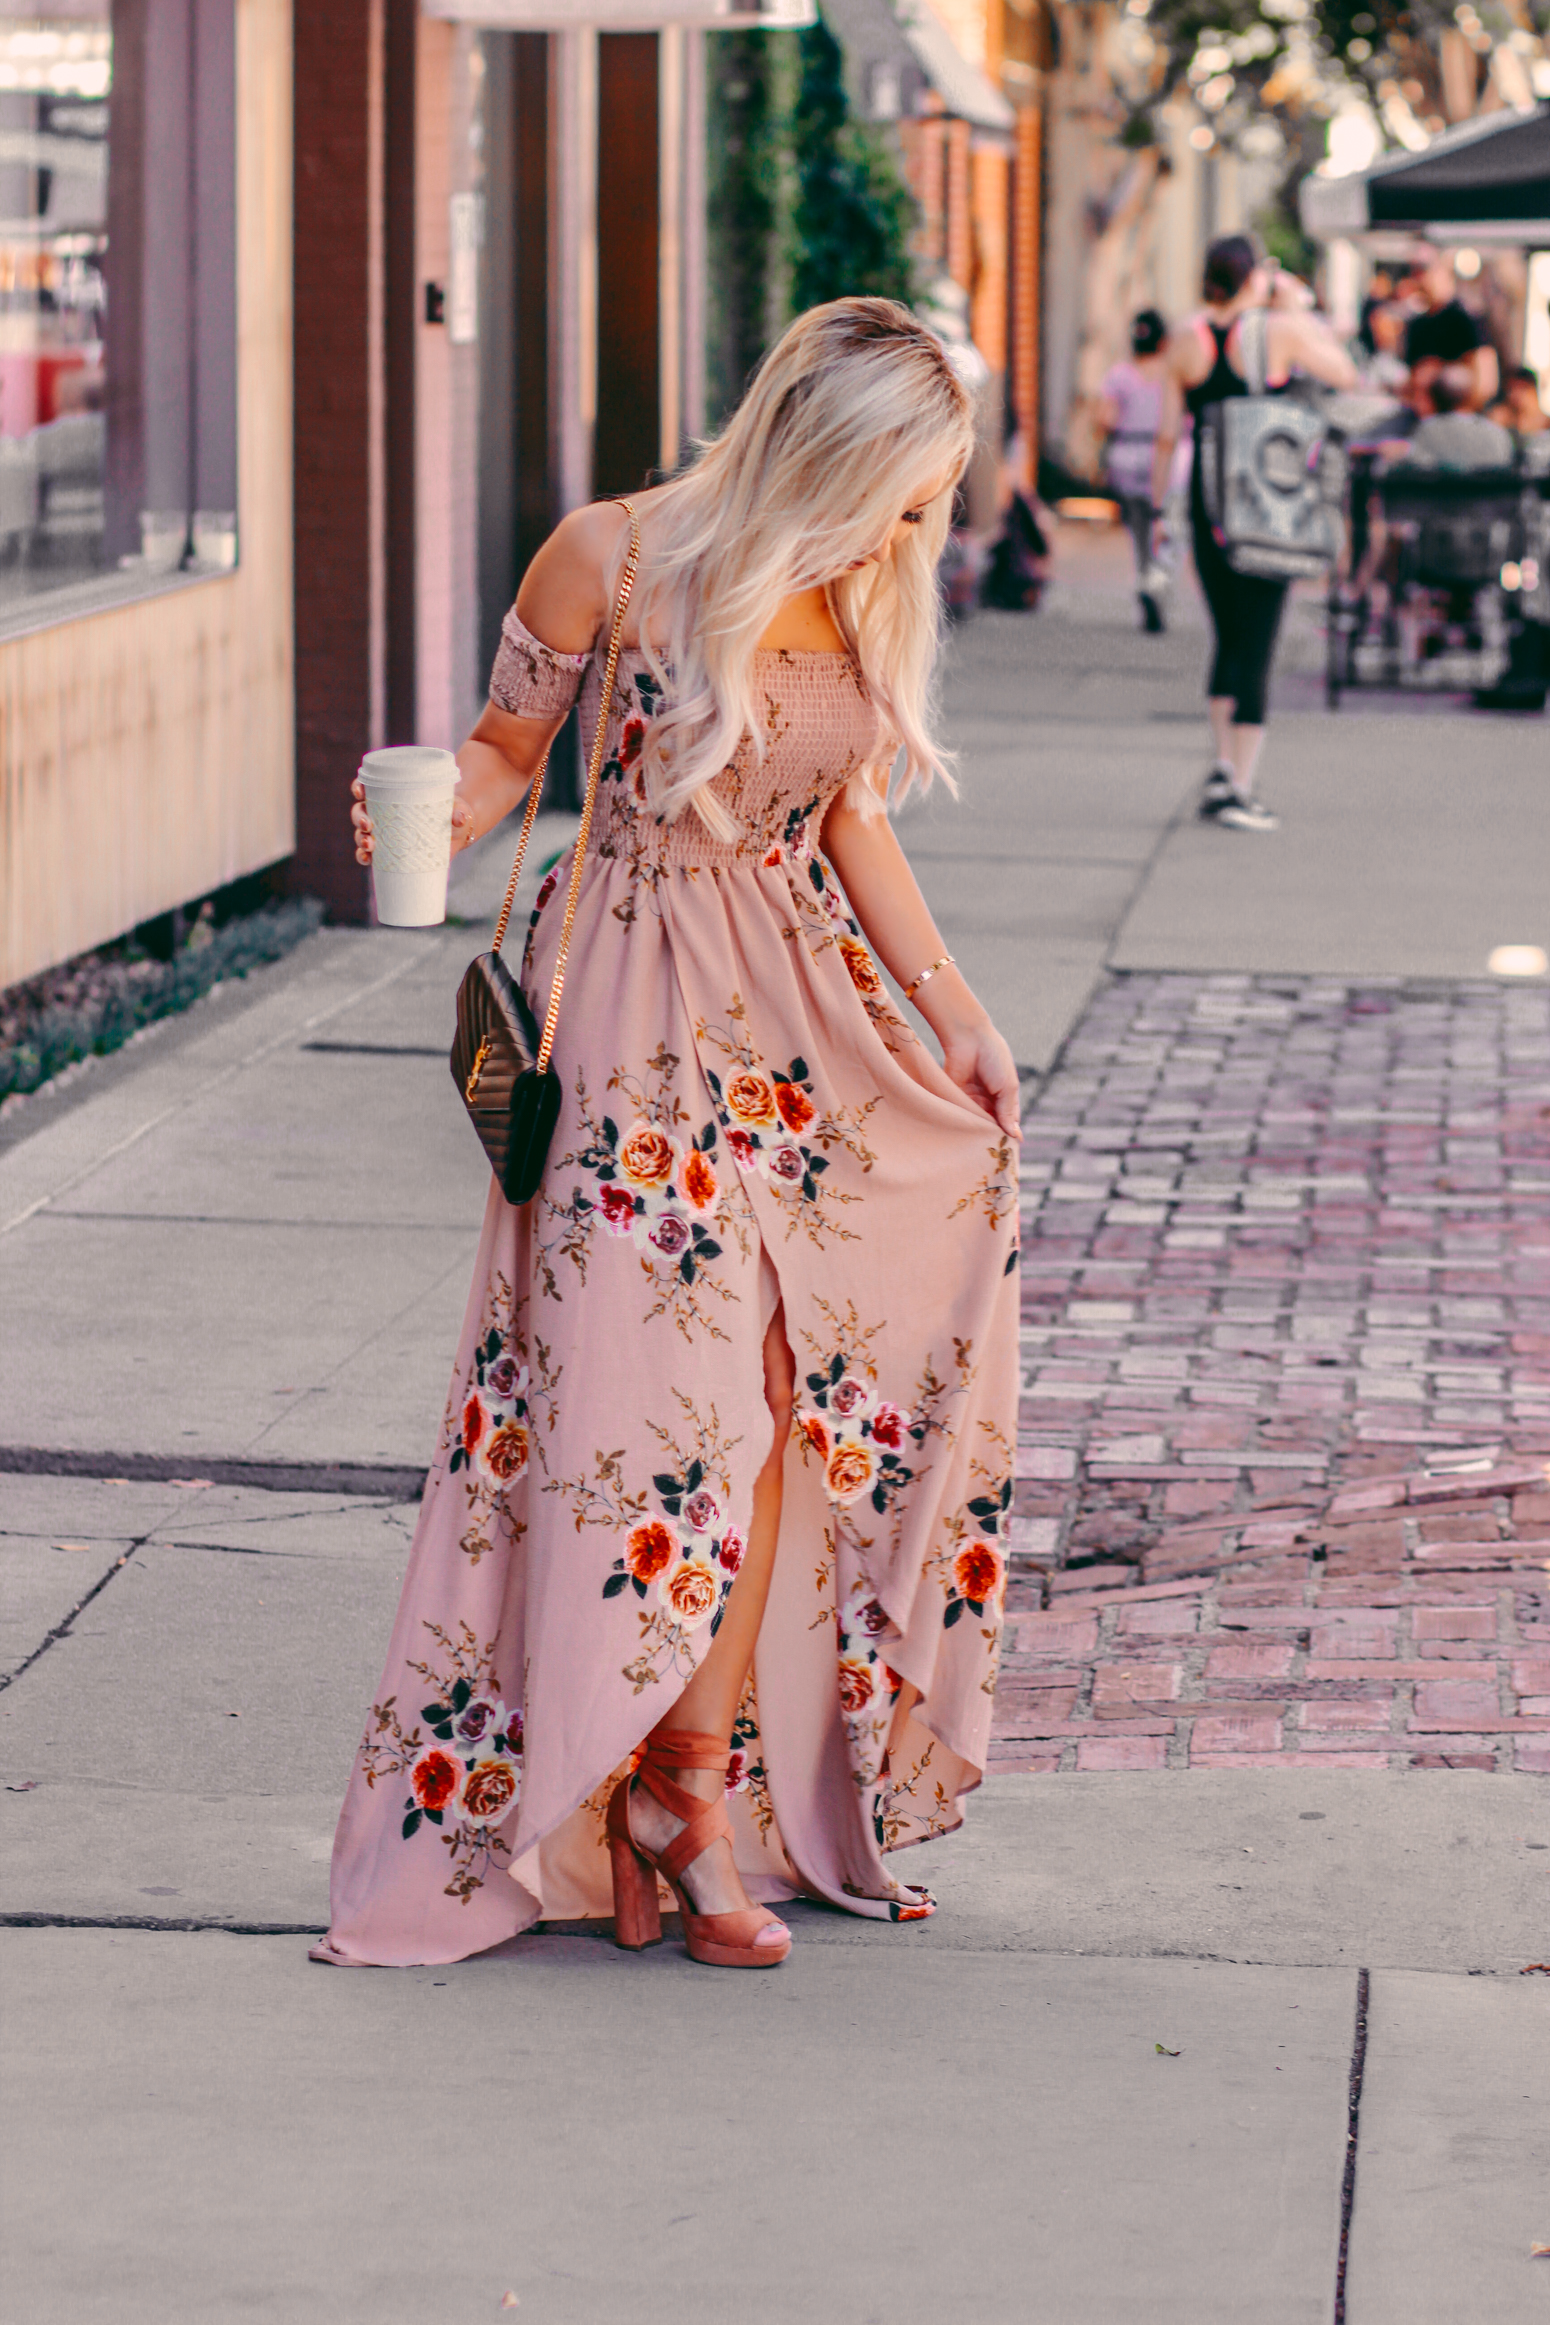 Blondie in the City | Fall in LA | Blush Floral Dress | YSL Bag